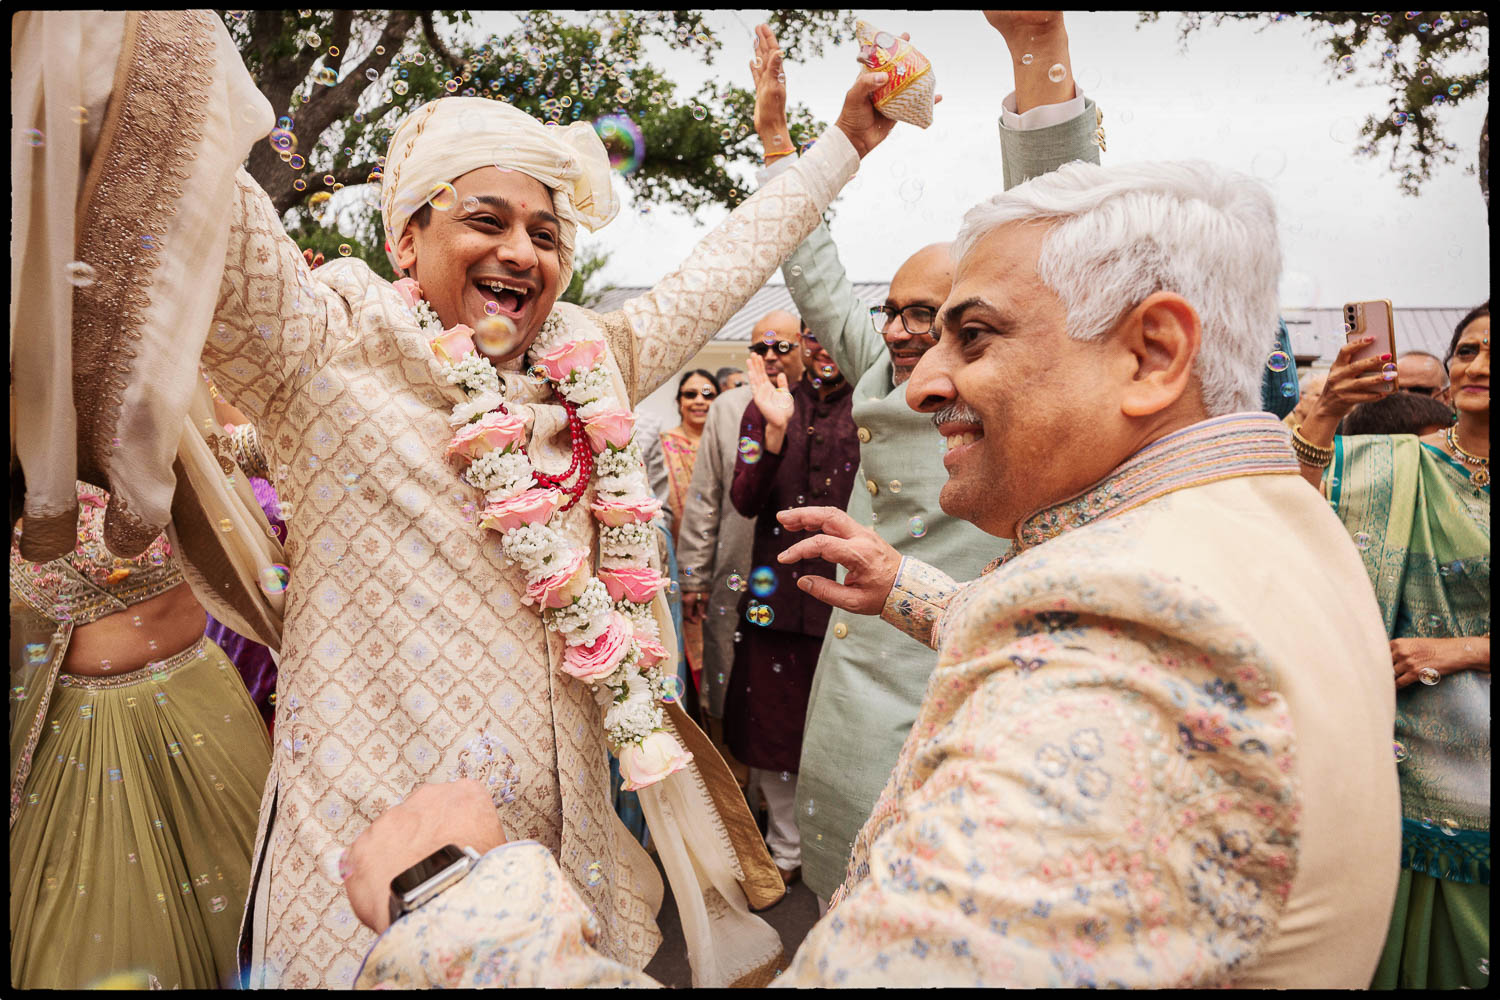 048 The Videre Estate South Asian Wedding in Wimberley Texas Philip Thomas wedding photographer L1080171 Edit